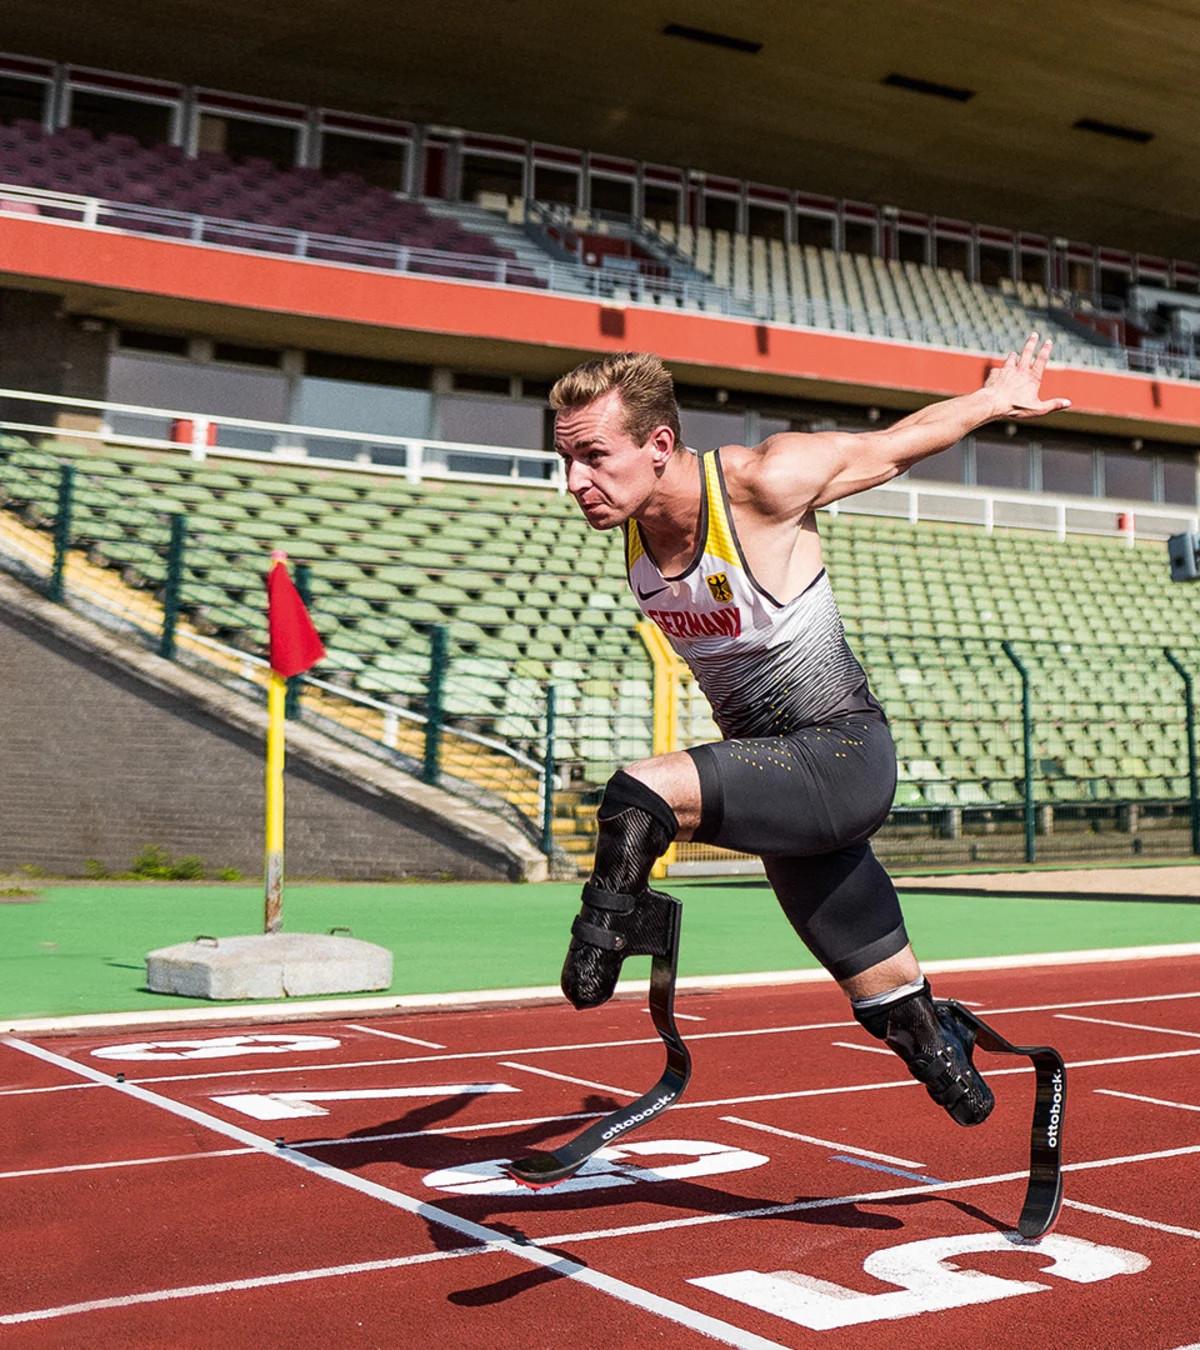 A bilateral amputee races to the finish line of a track field, sporting Ottobock's Runner prosthetic feet